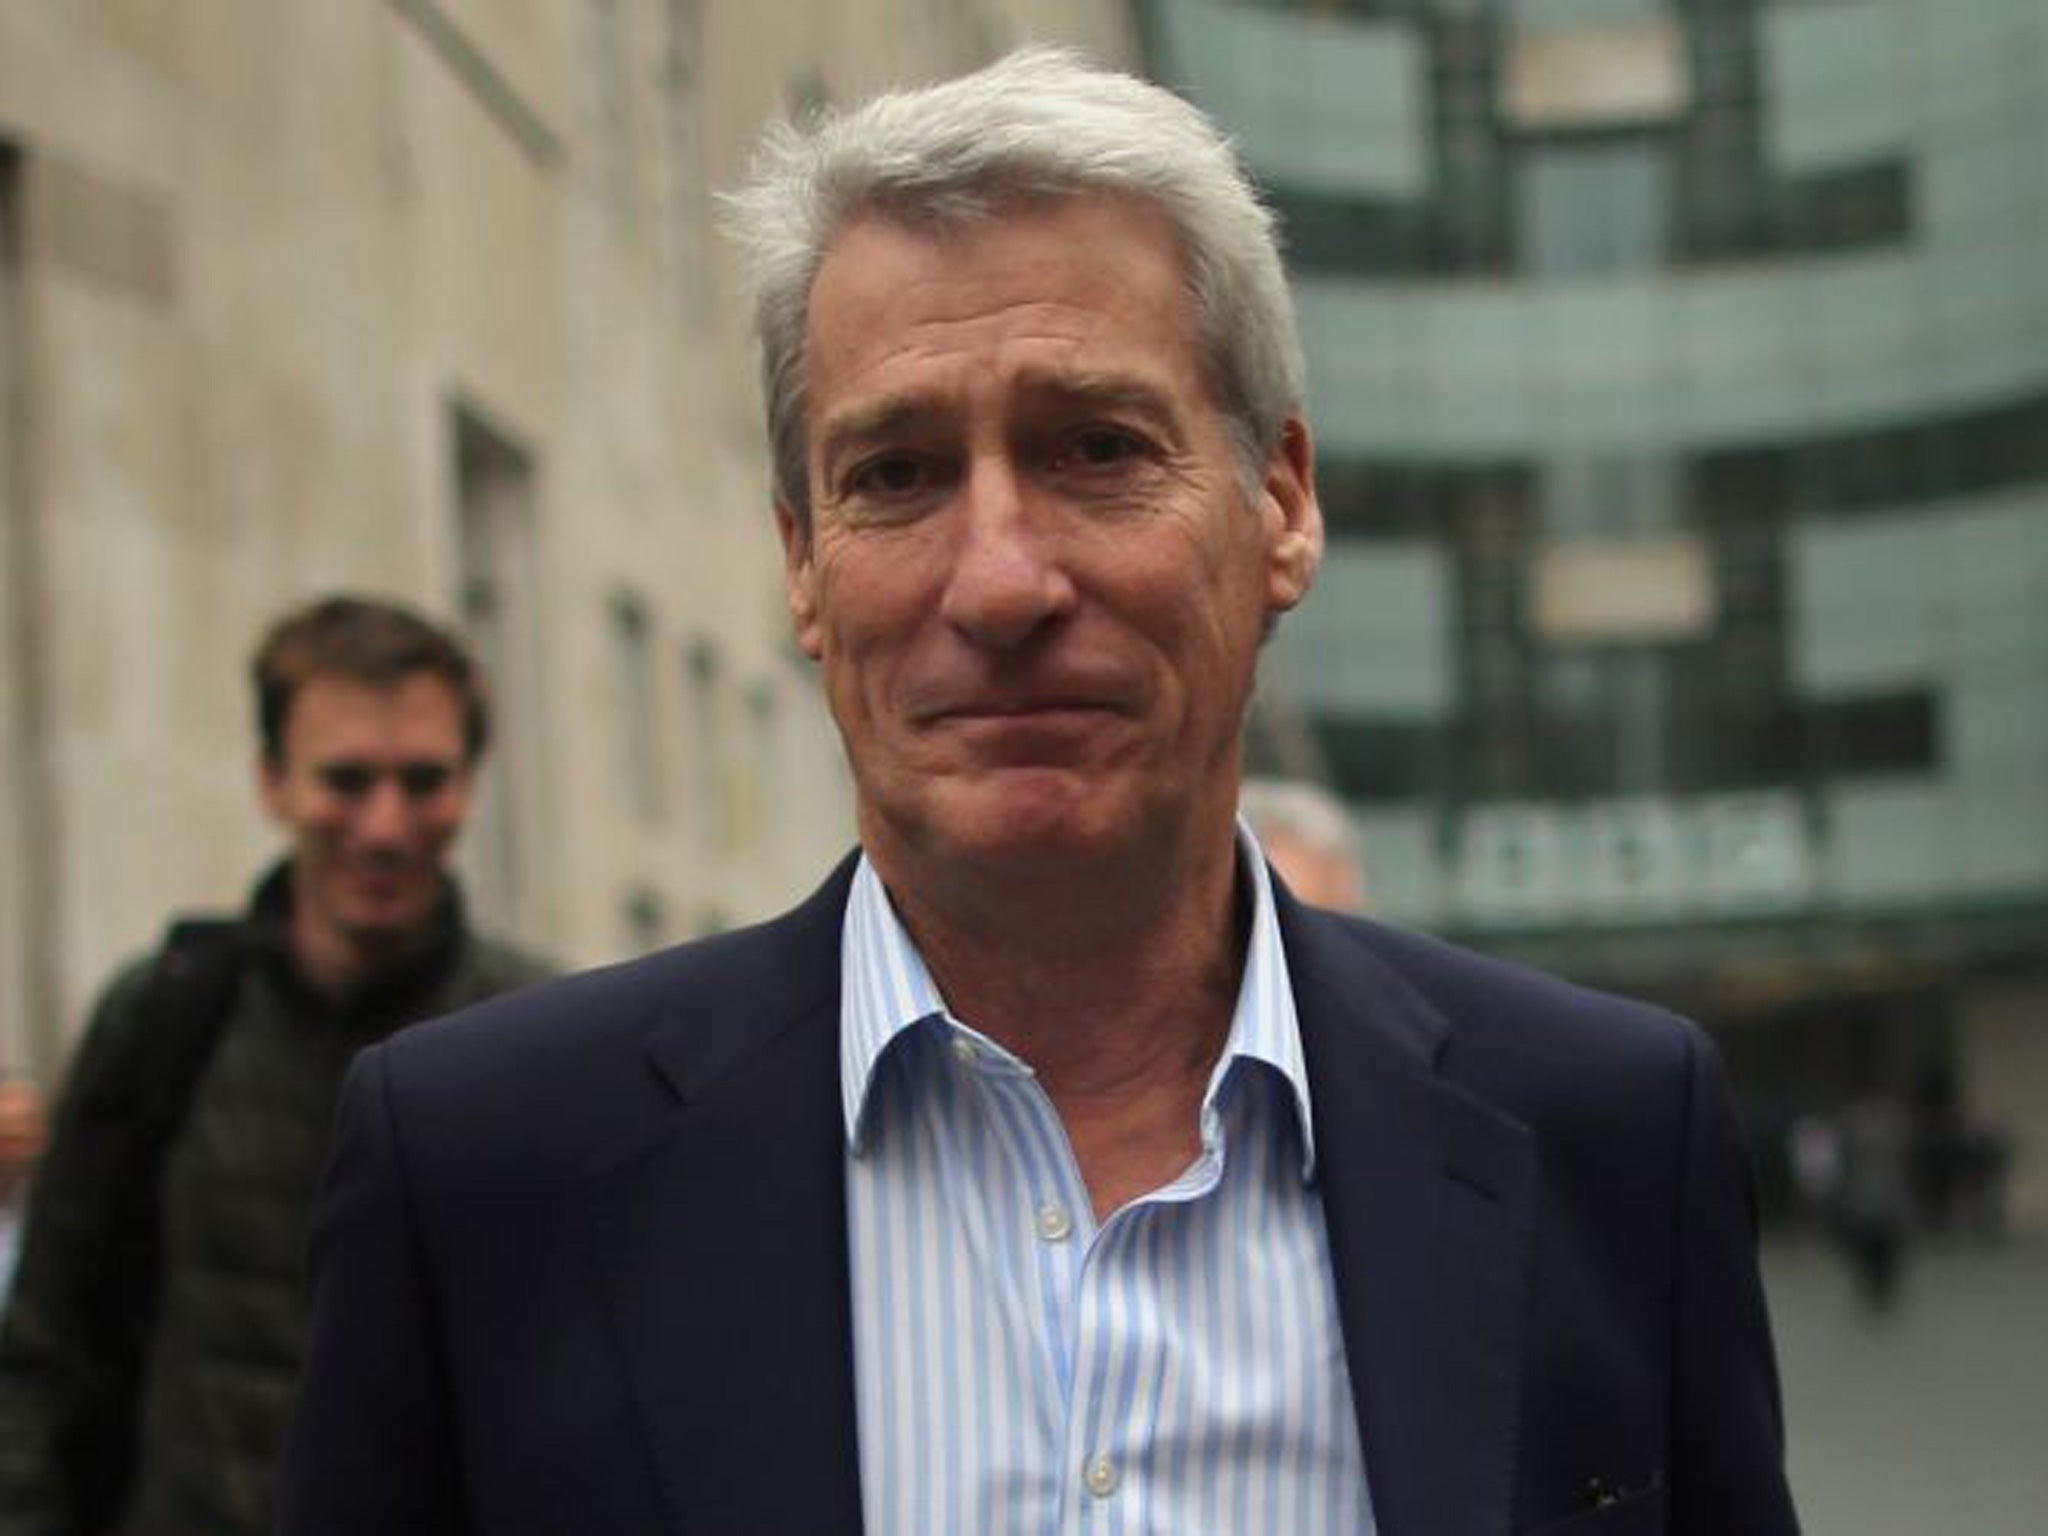 Jeremy Paxman has admitted he is a 'one-nation Tory' and complained that Newsnight is made by idealistic '13-year-olds' who foolishly think they can 'change the world'.